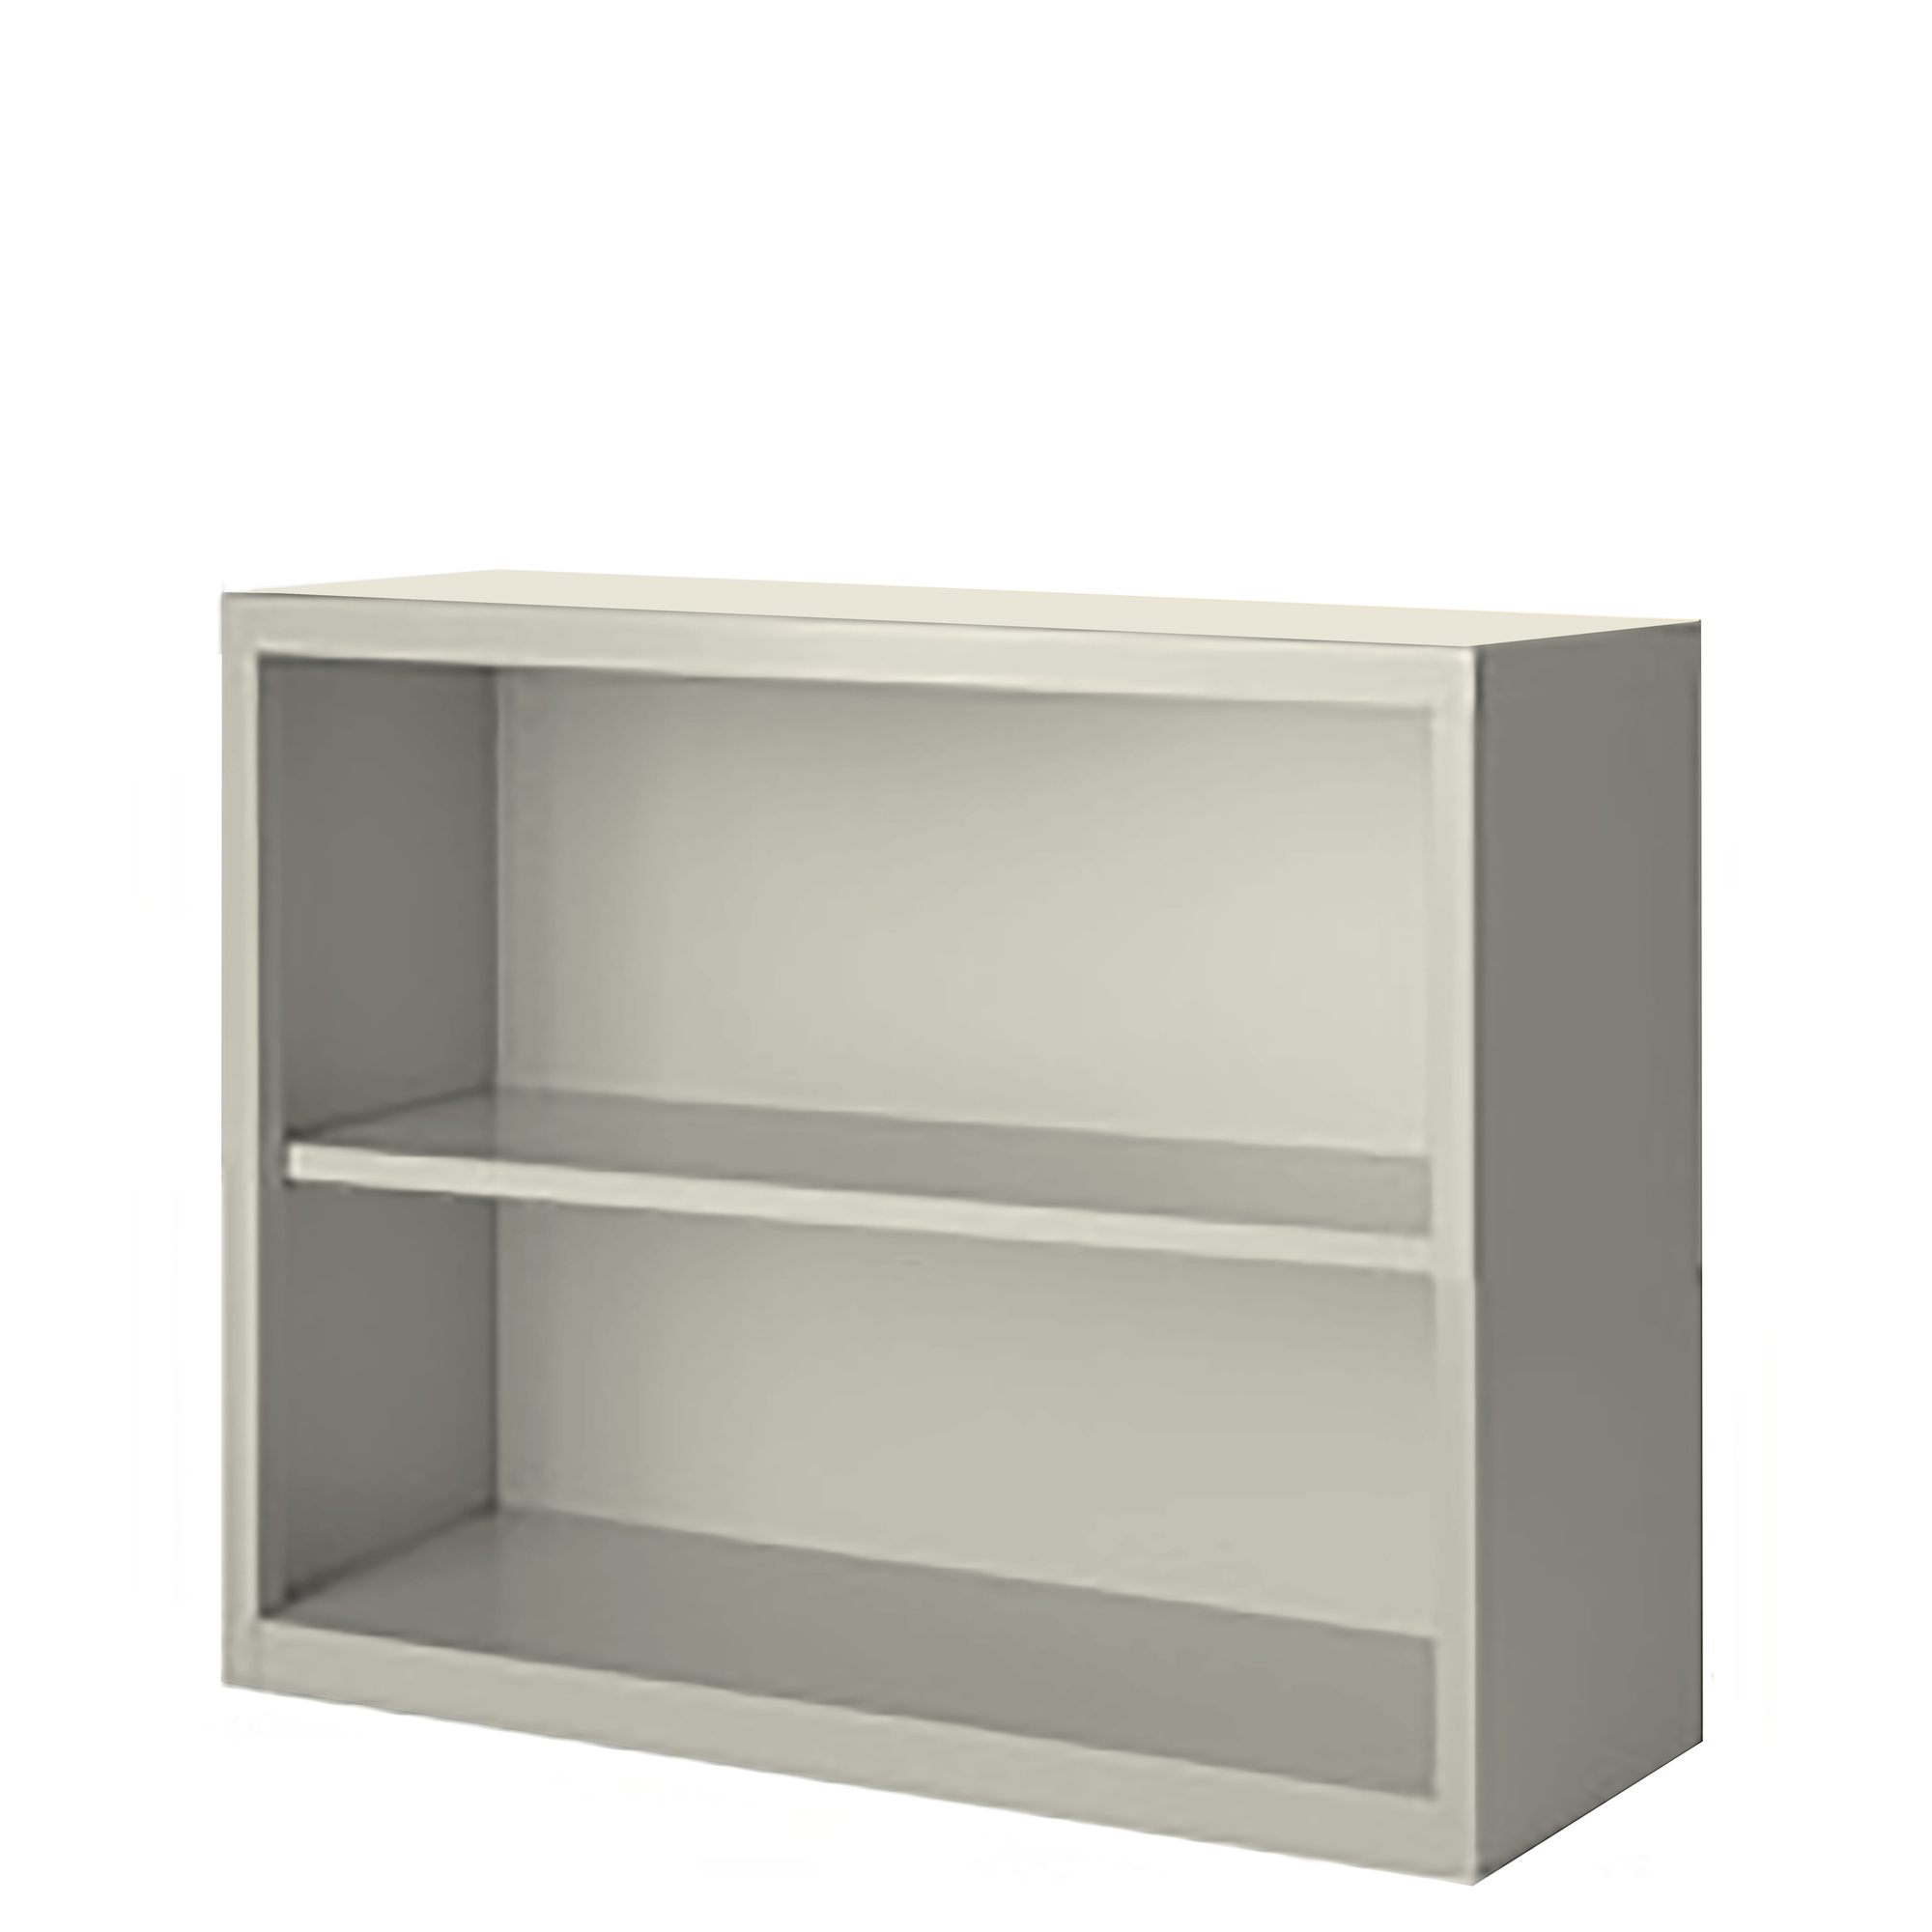 Steel Cabinets USA, 36Inchx13Inchx30Inch Putty Bookcase Steel Fully Assembled, Height 30 in, Shelves (qty.) 2, Material Steel, Model BCA-363013-P